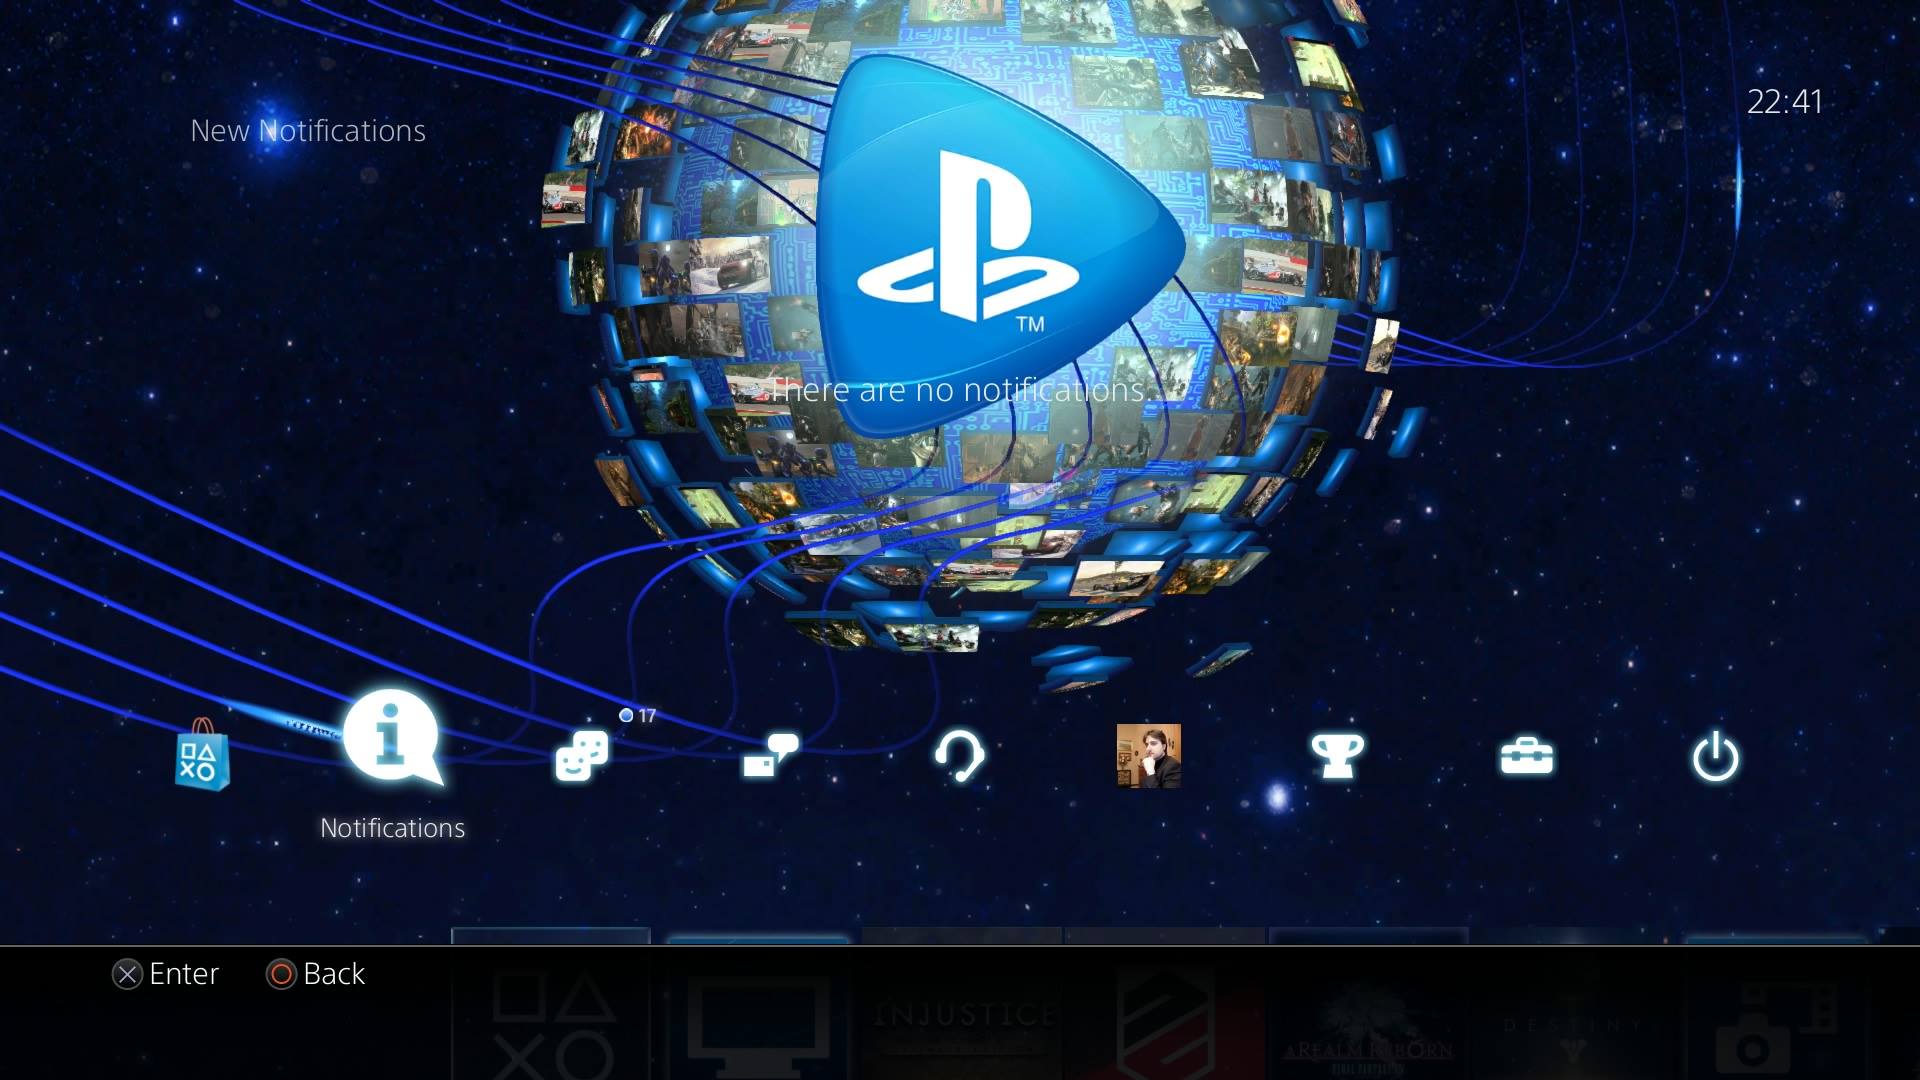 Playstation Now Ps4 Dynamic Theme Just Released By Sony On The